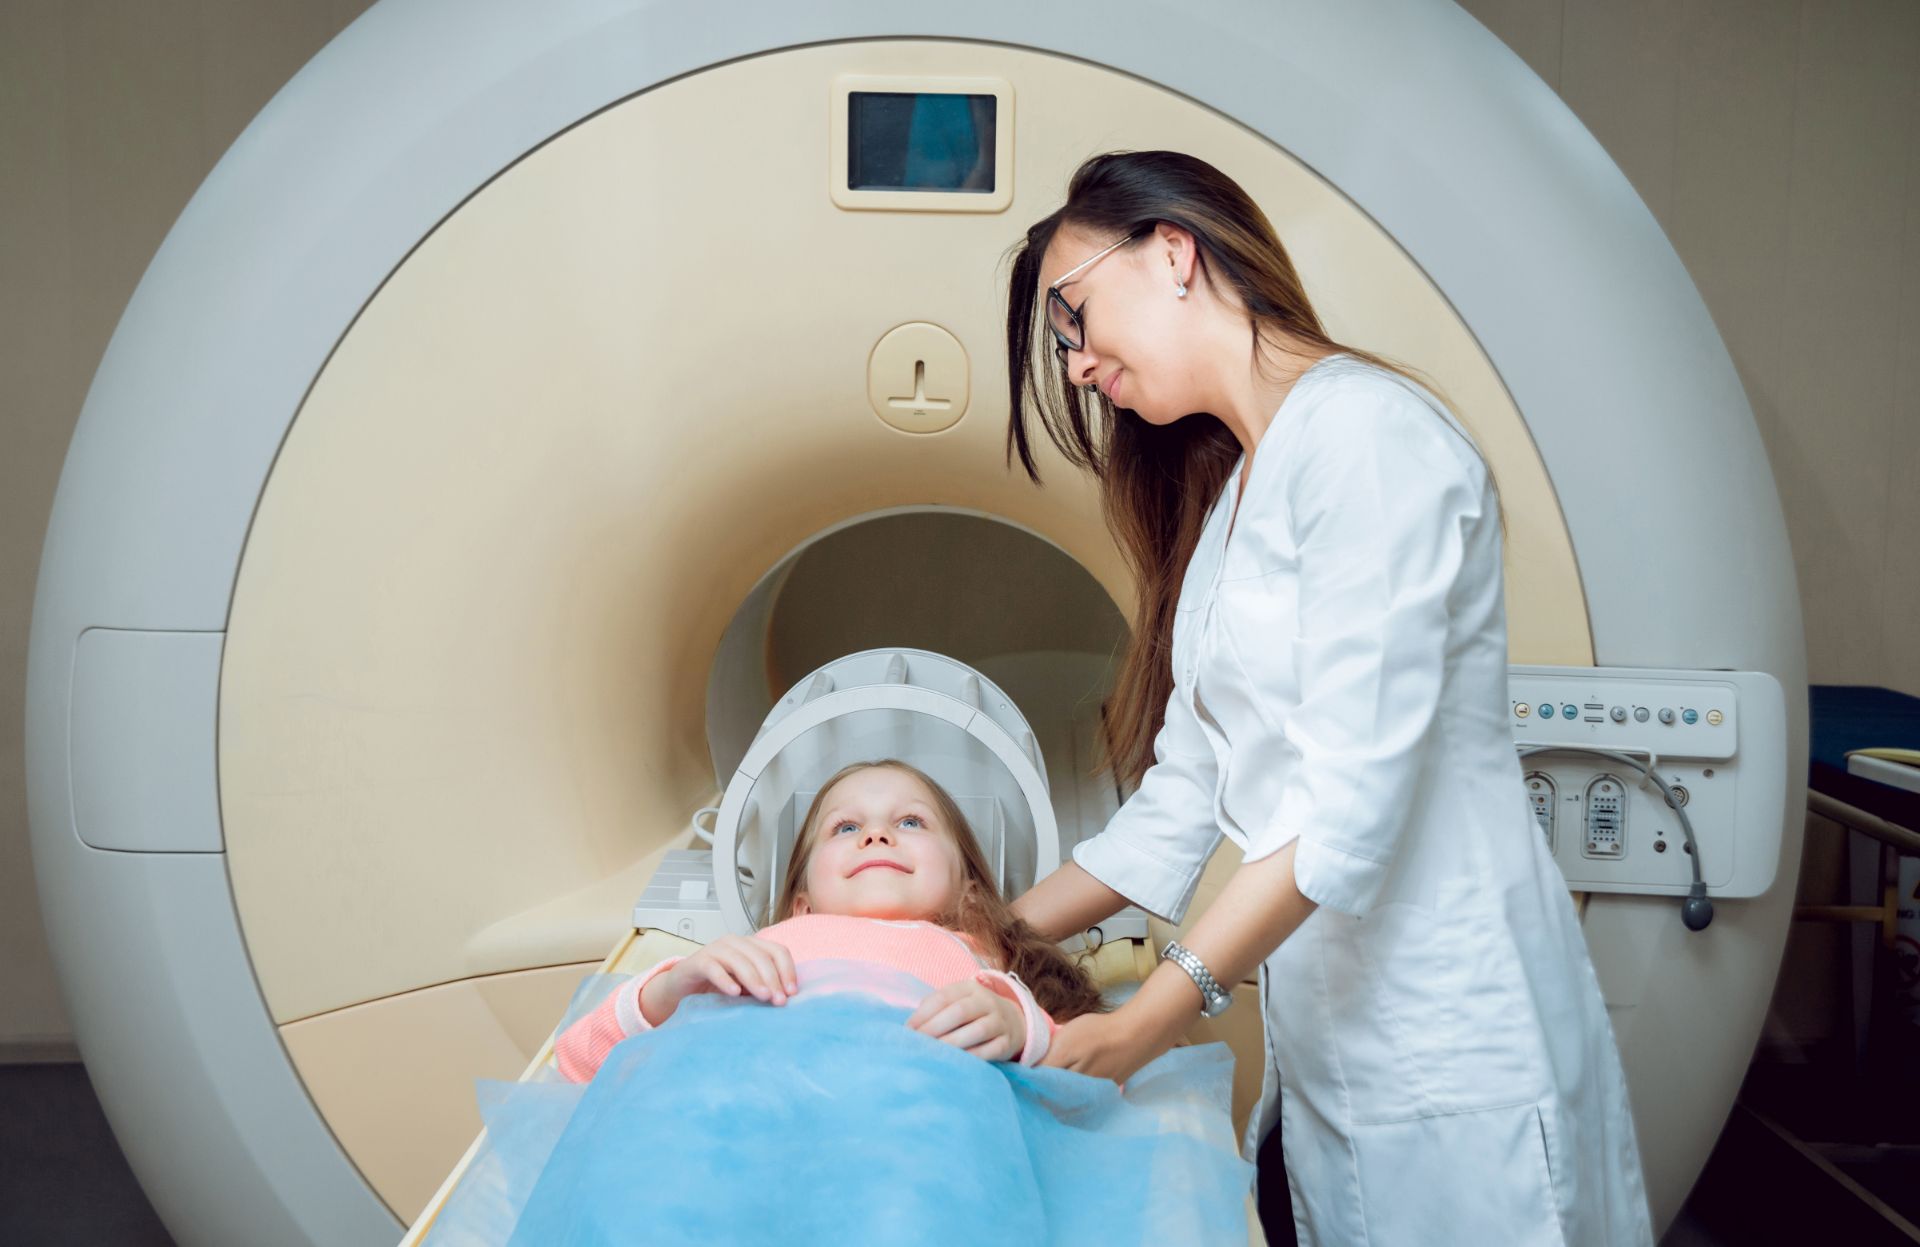 Is It Safe for Children to Get an MRI?